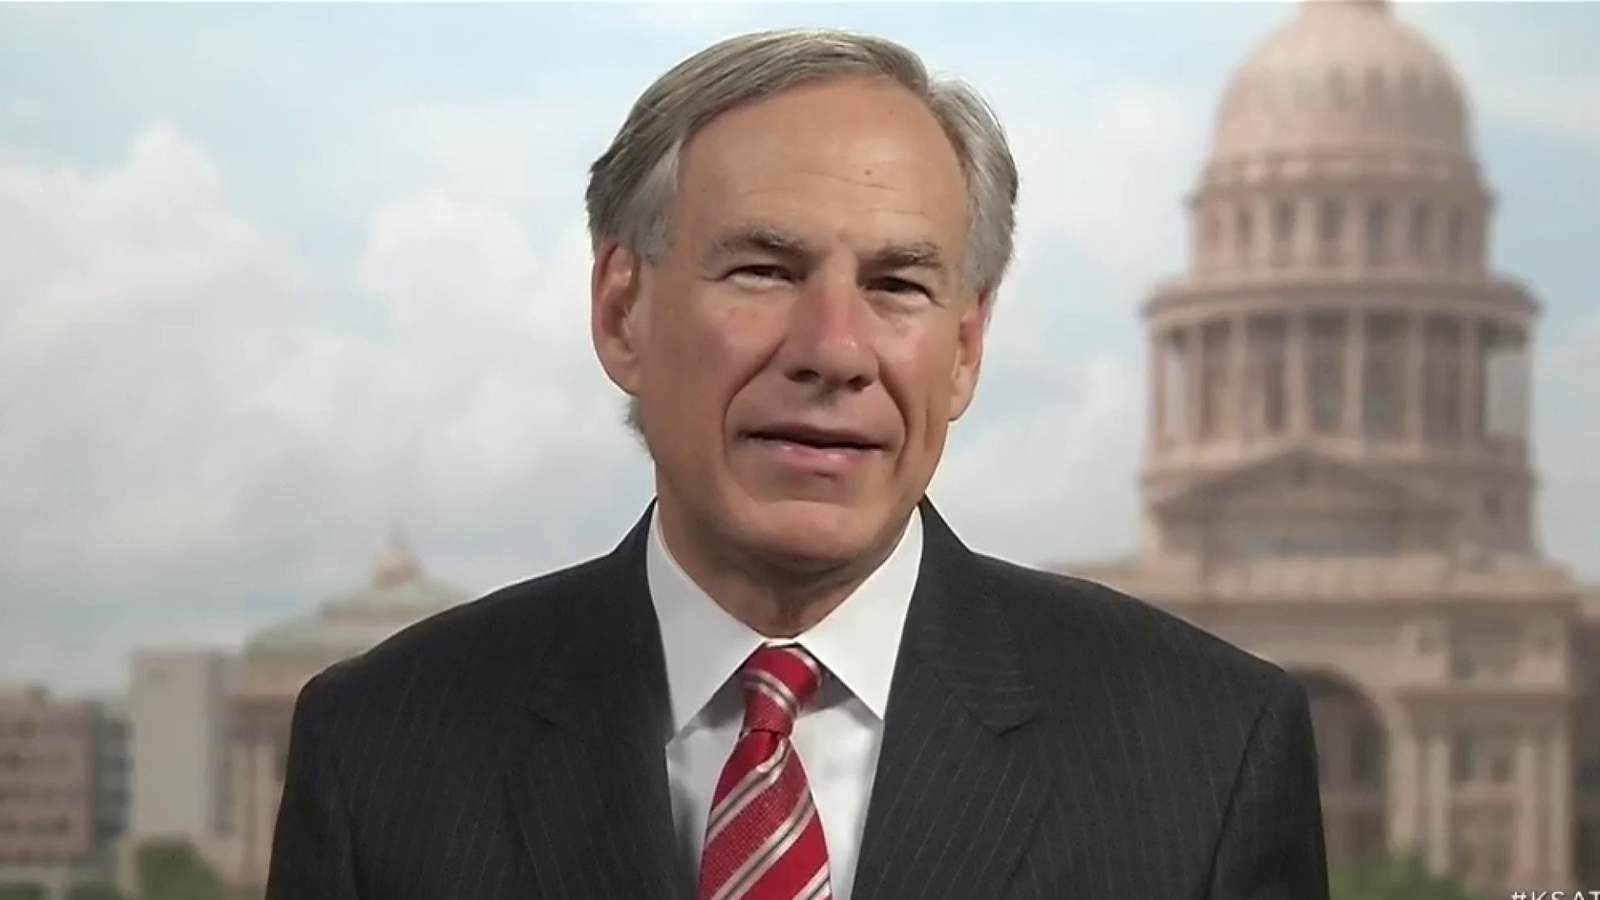 Texas Gov. Greg Abbott reportedly says in recorded phone call that reopening state will increase coronavirus spread